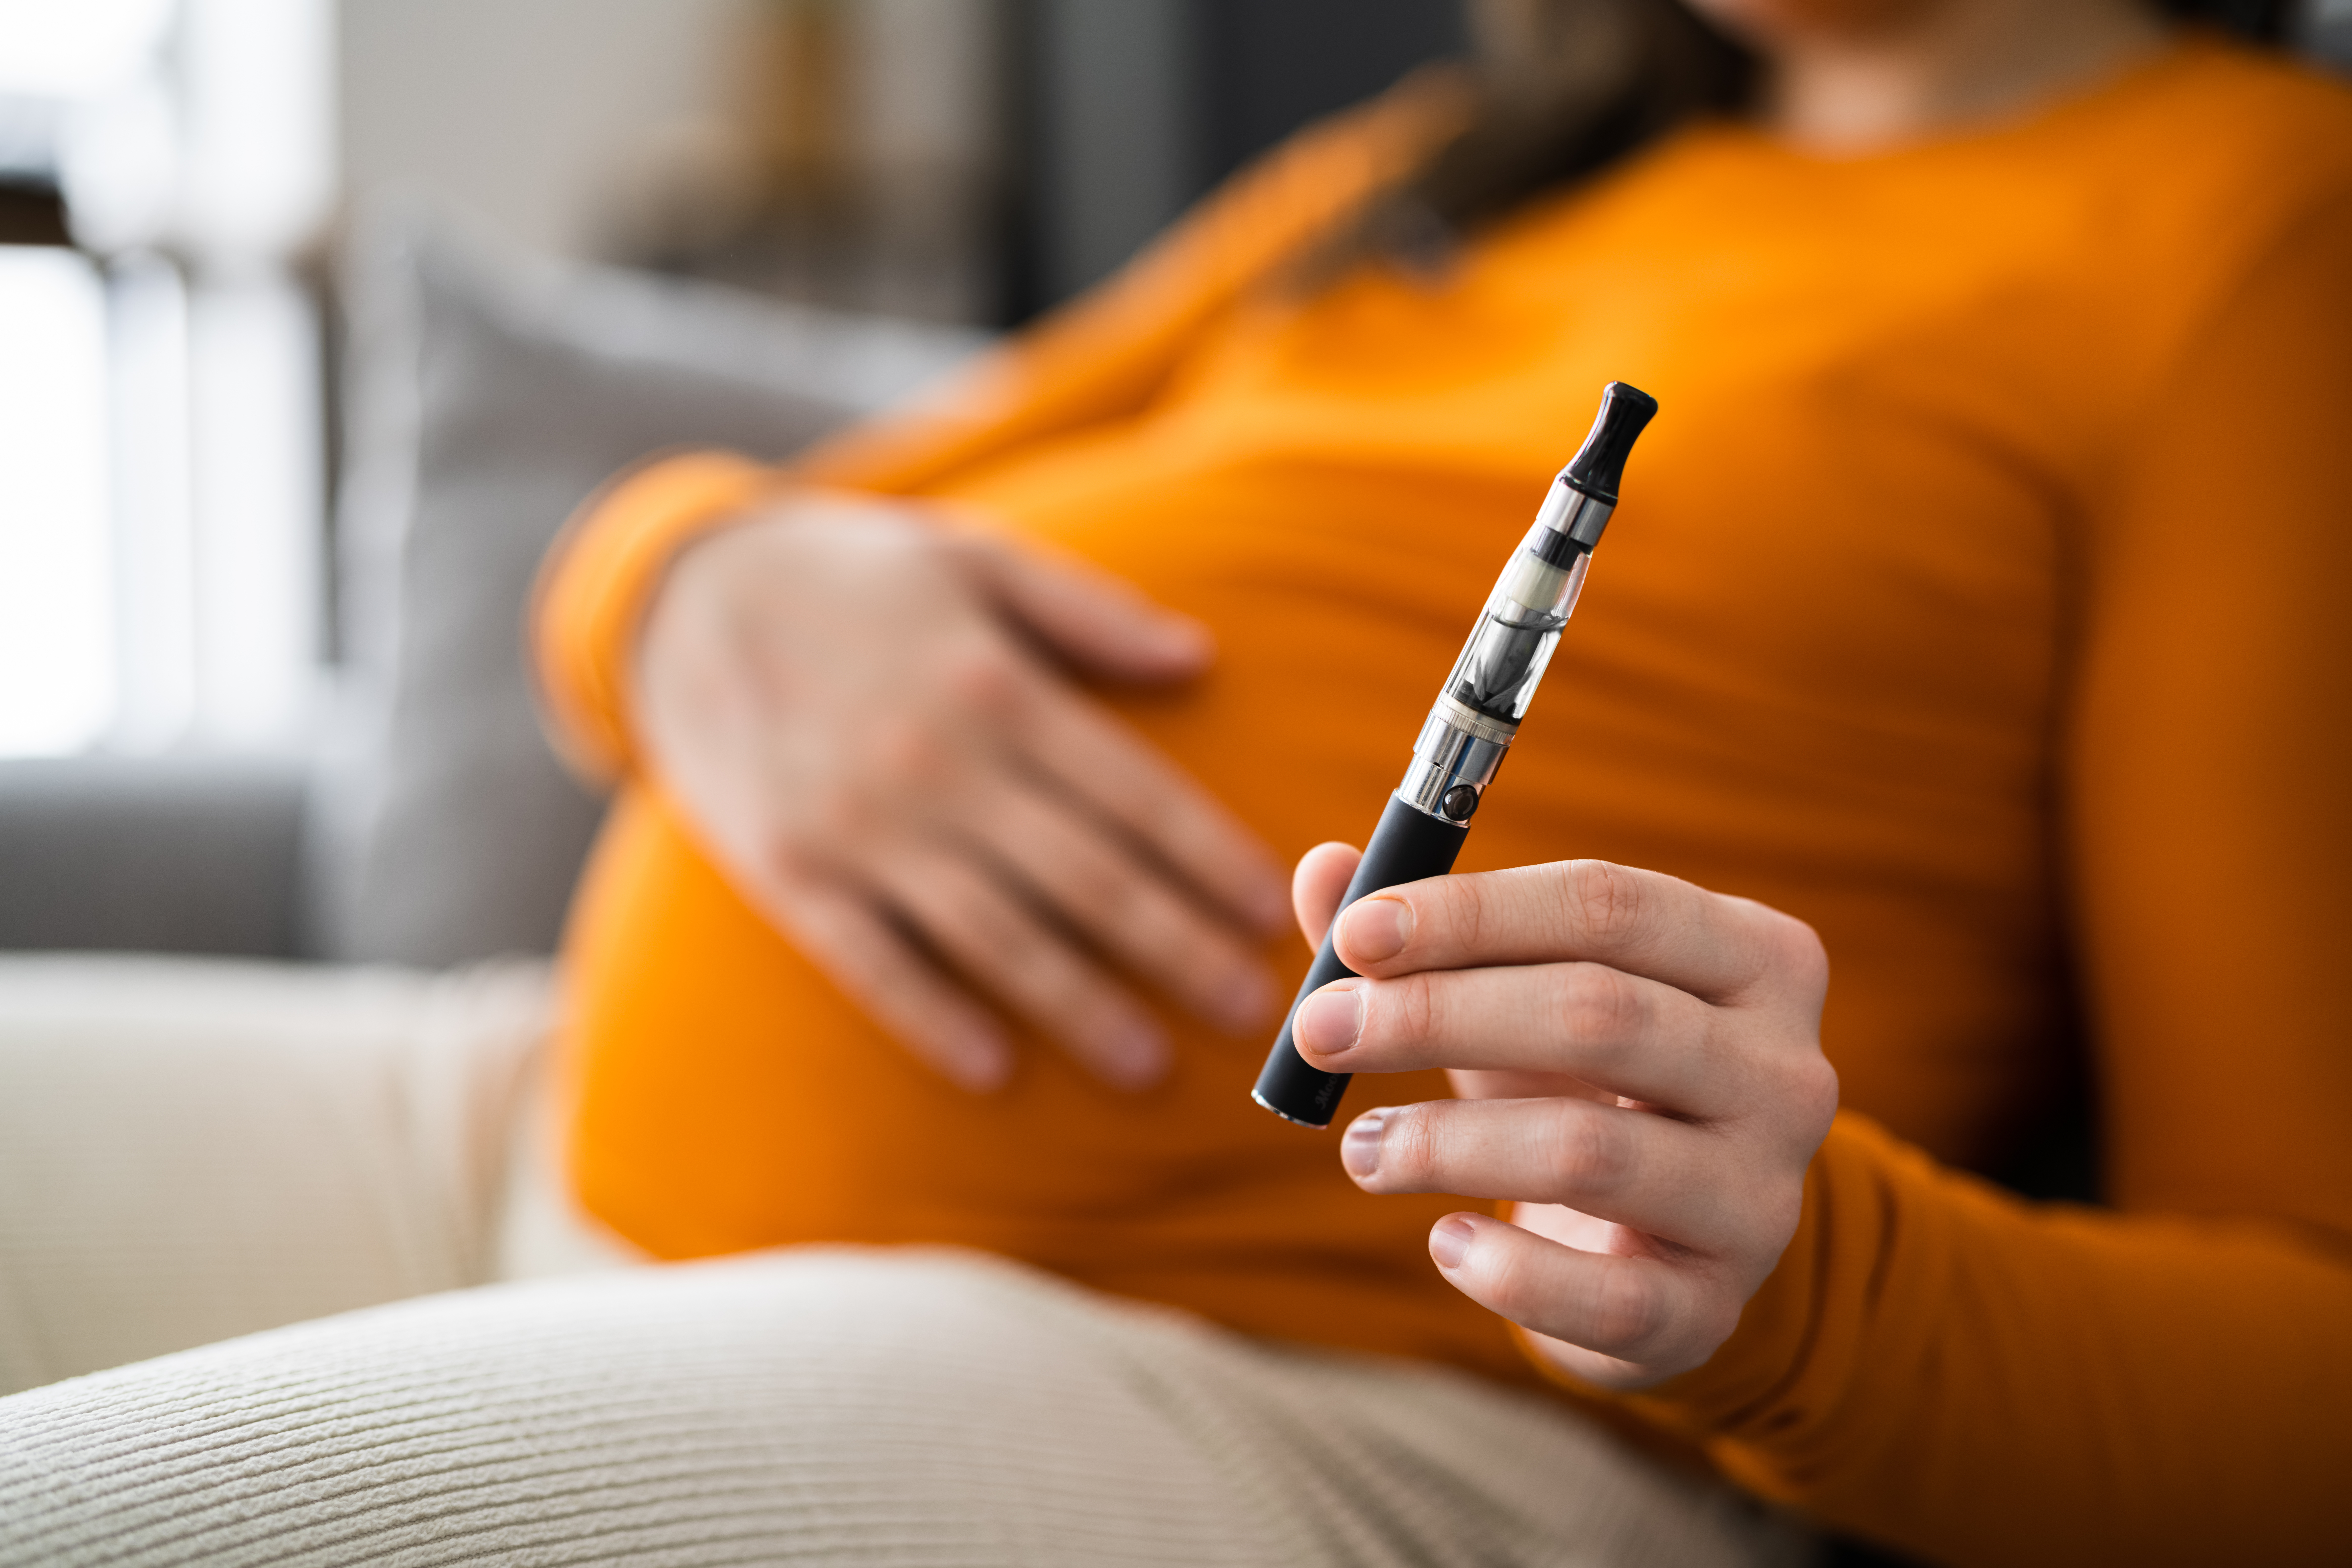  Study: E-Cigs Effective at Helping Pregnant Smokers Quit